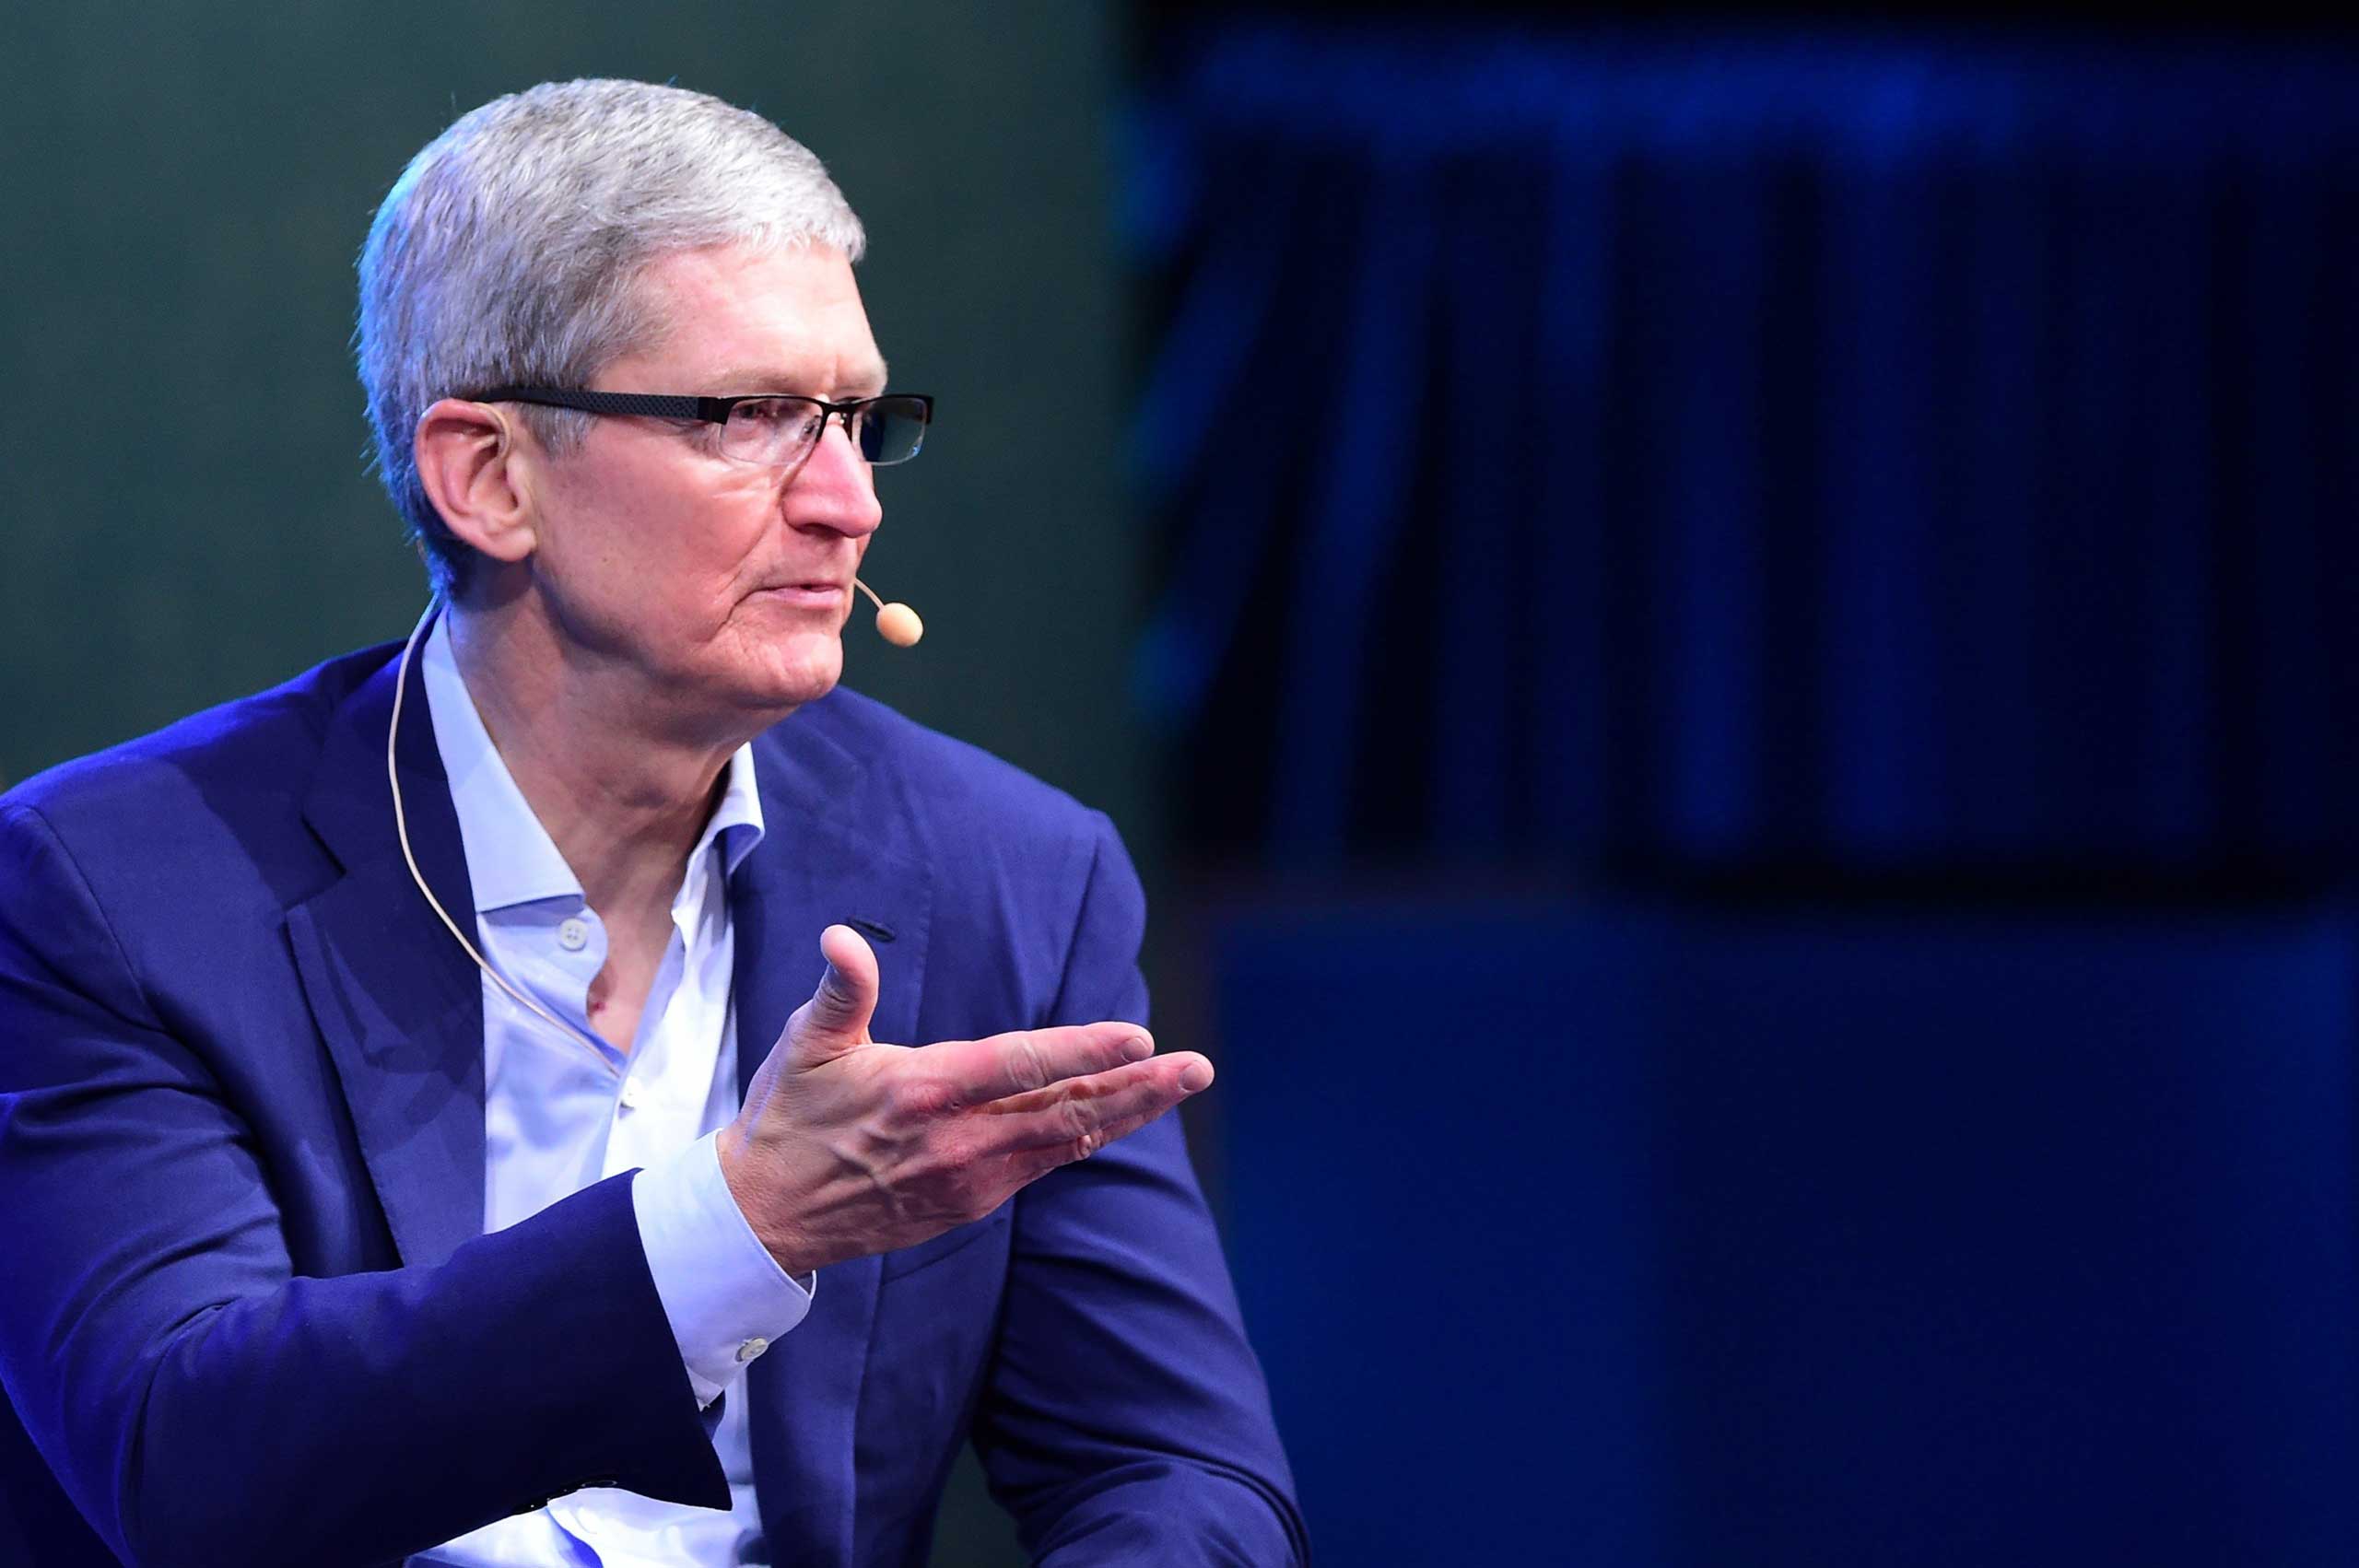 Tim Cook, CEO of Apple, gestures while responding to questions in Laguna Beach, California at the opening of the 2015 WSJD Live, on Oct. 19, 2015. (Frederic J. Brown—AFP/Getty Images)